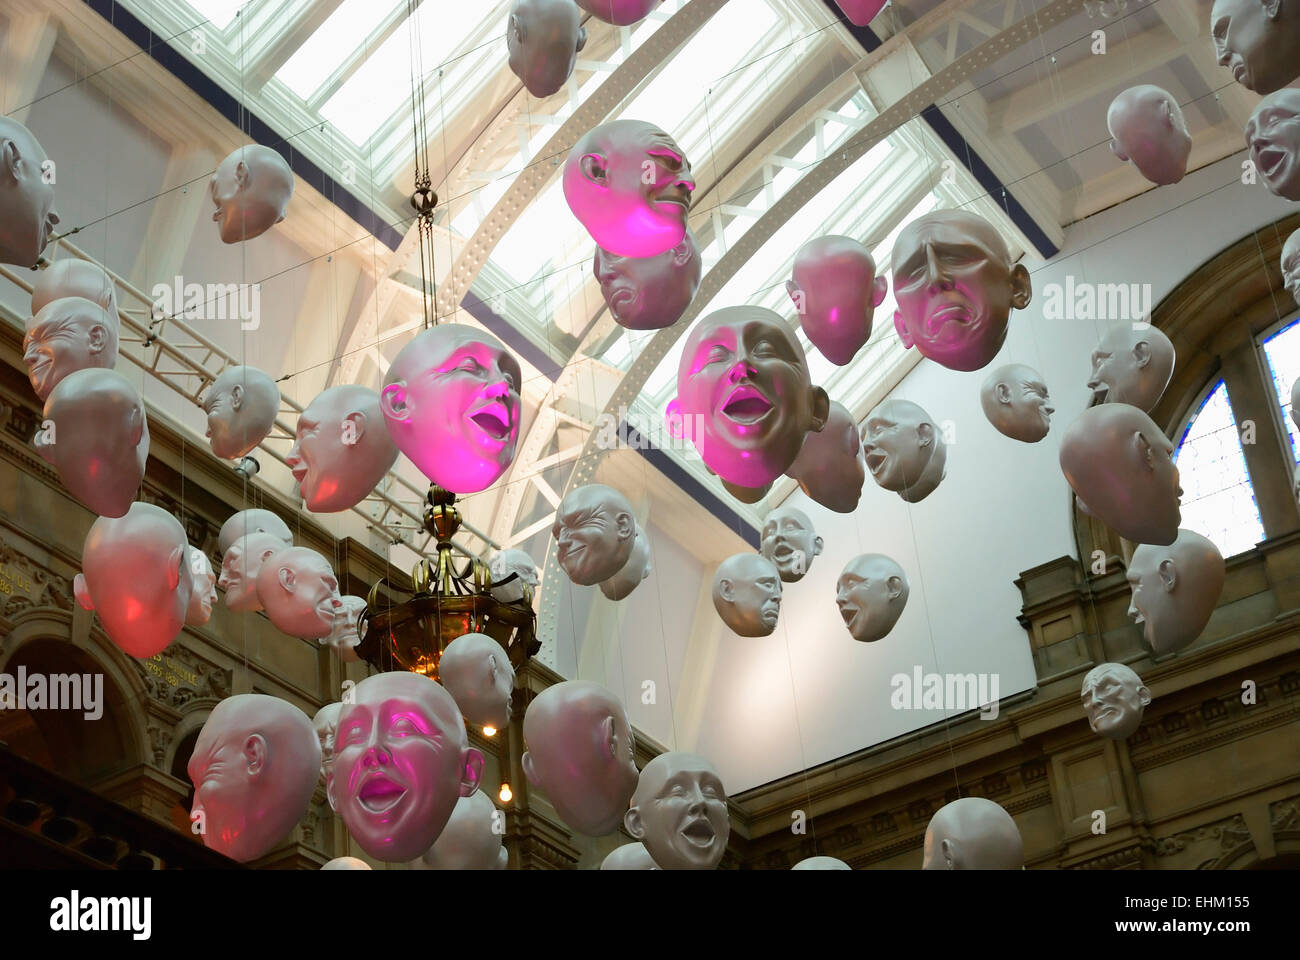 Glasgow. Kelvingrove Art Gallery and Museum Banque D'Images